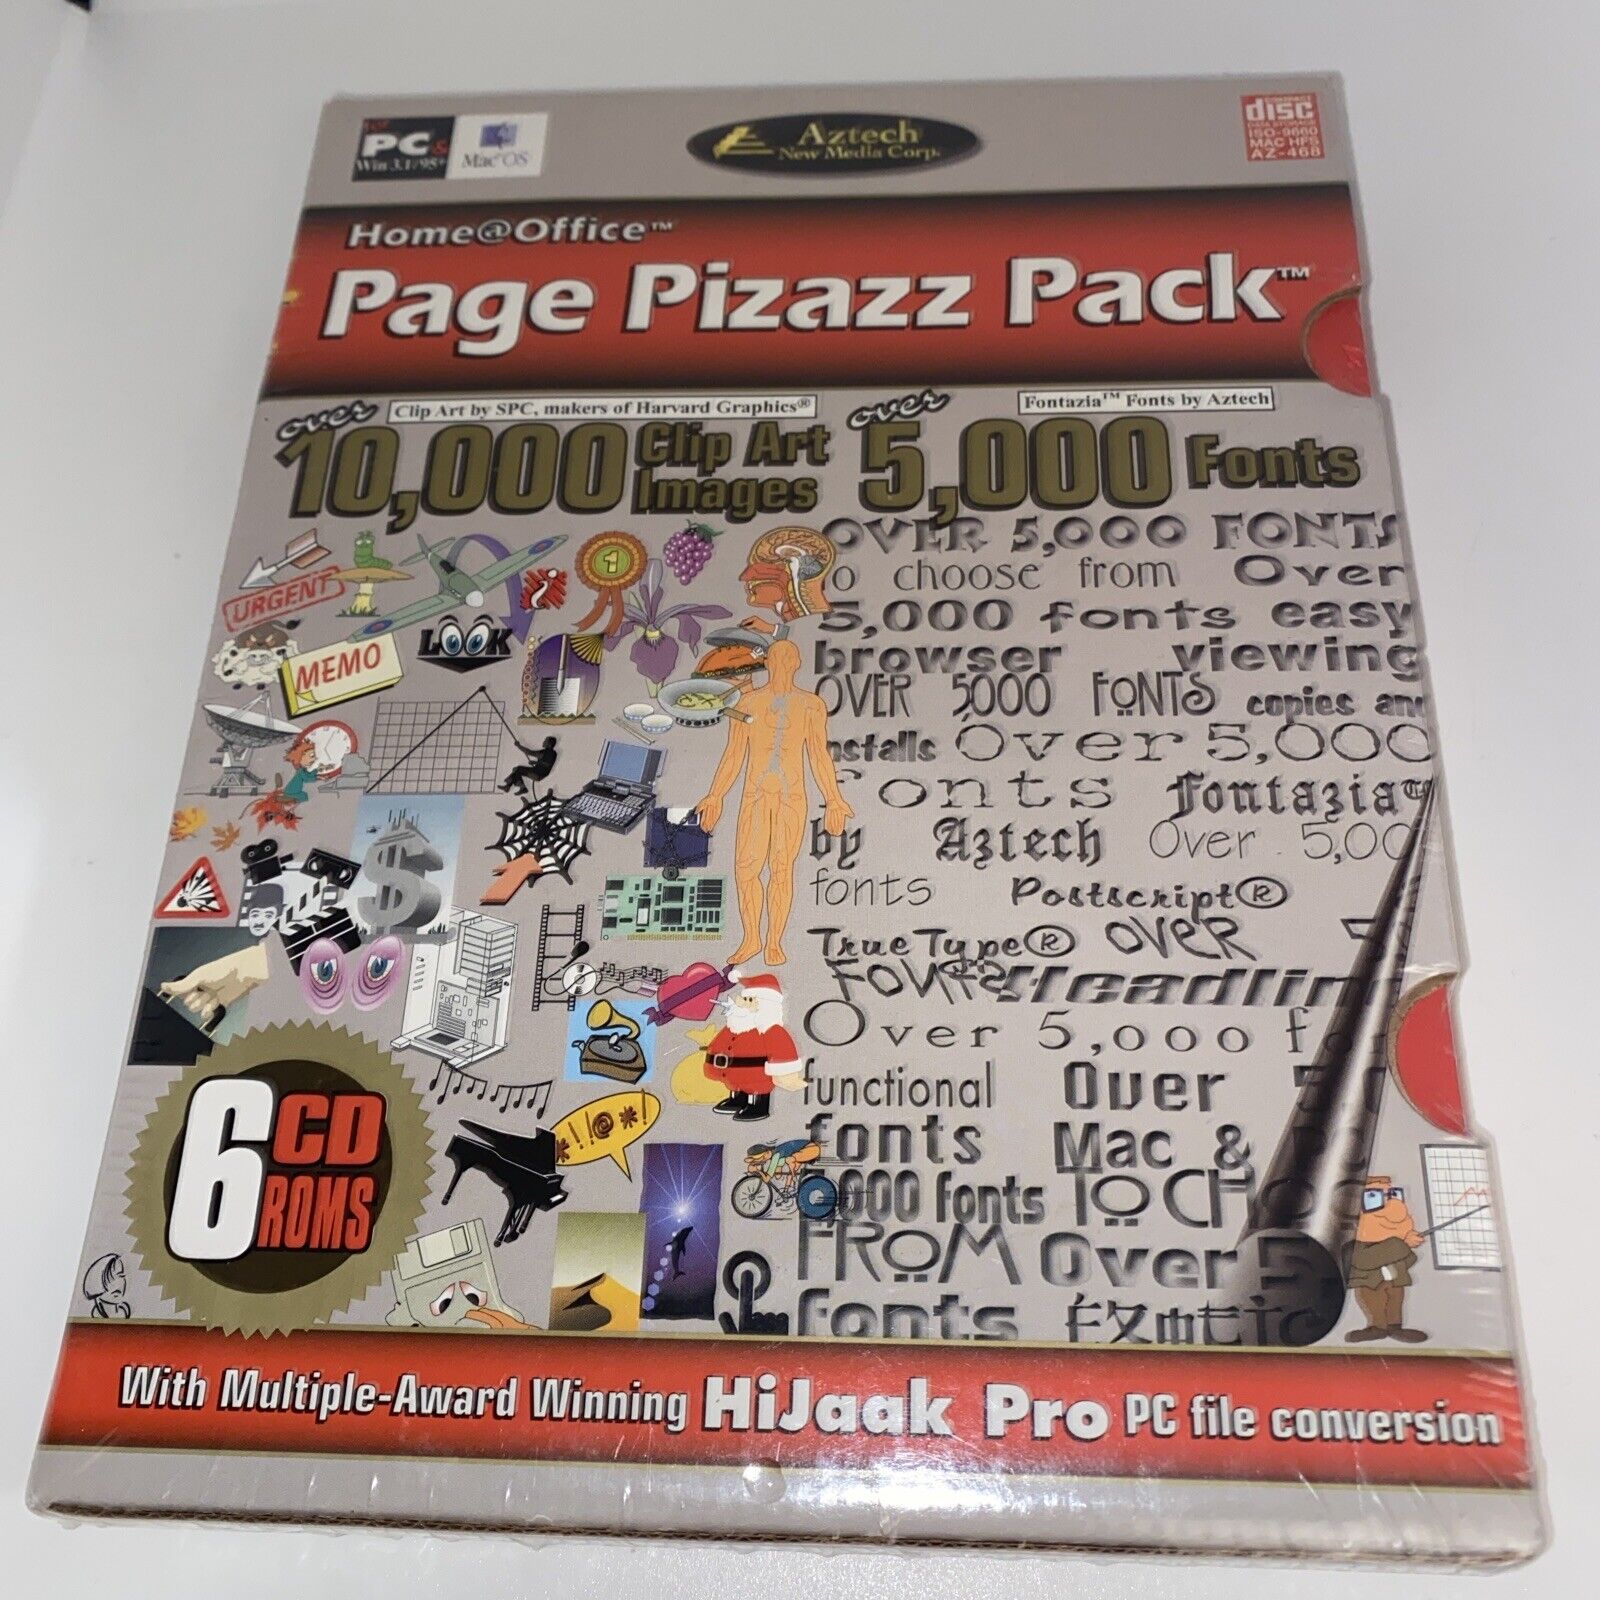 Vintage rare software - PC MAC Page Pizazz Pack Clip Art Sealed Gift Collectible